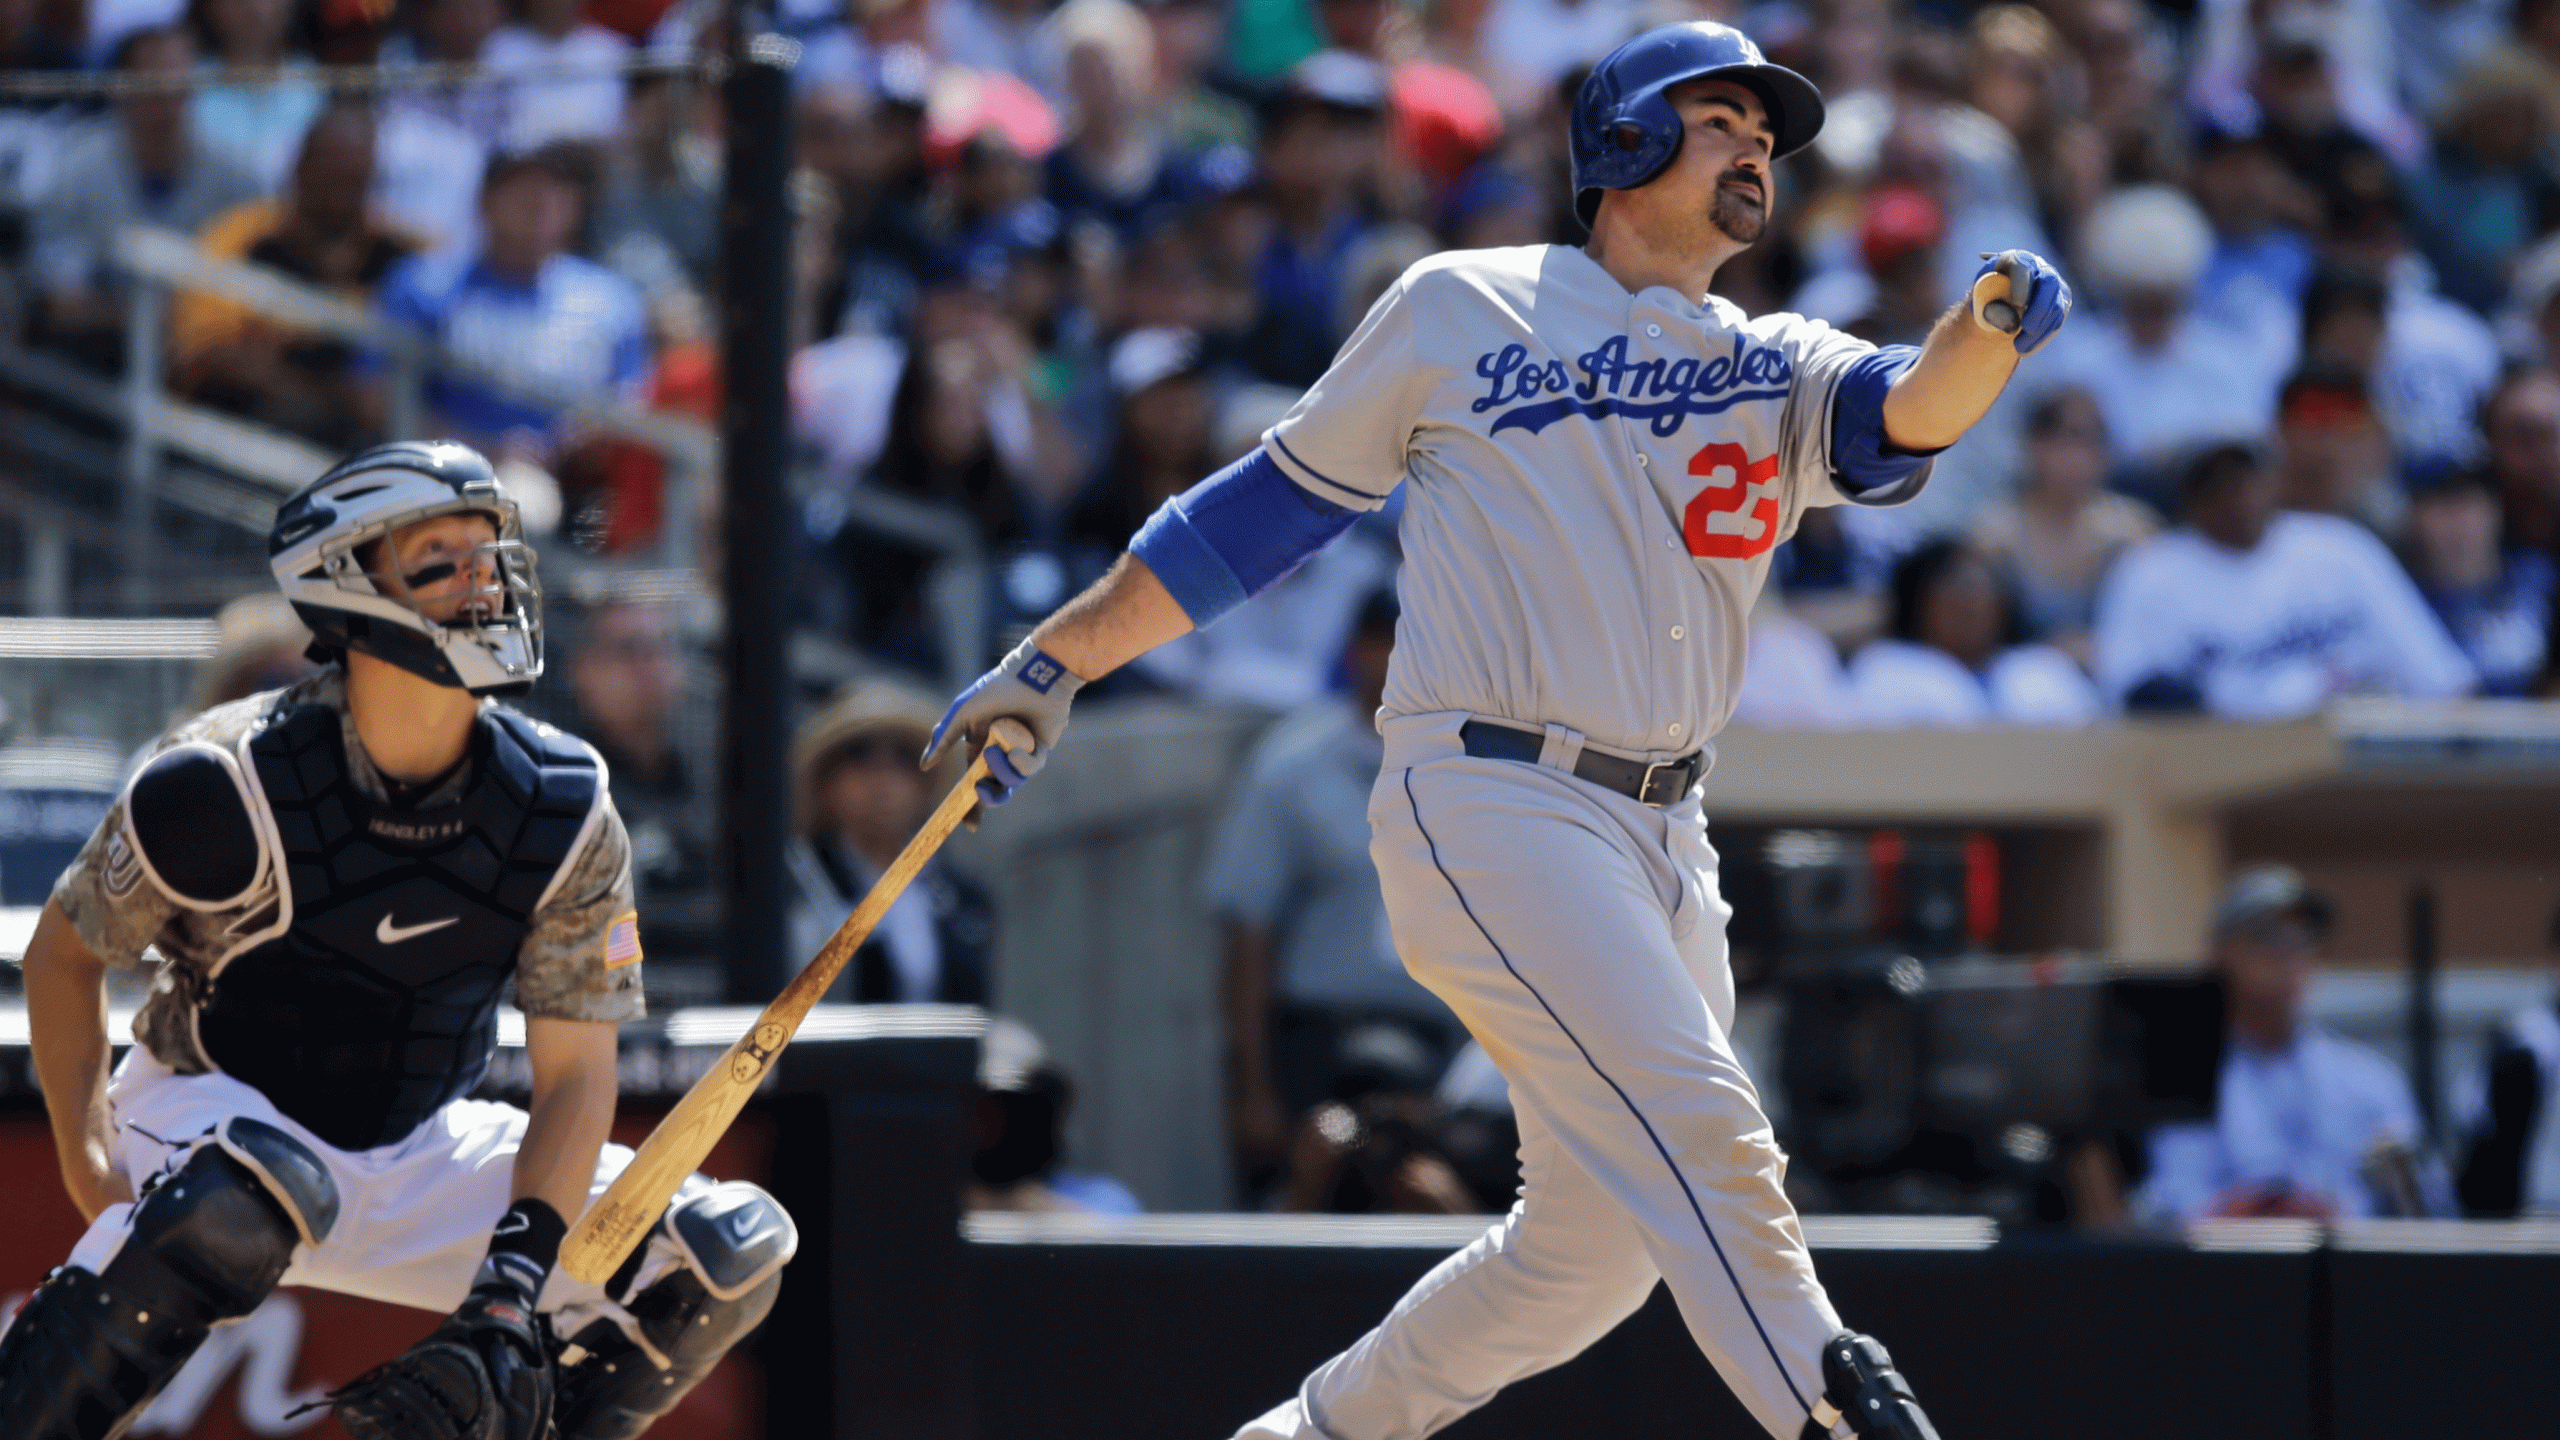 Matt Kemp back with Dodgers, Adrian Gonzalez out in five-player